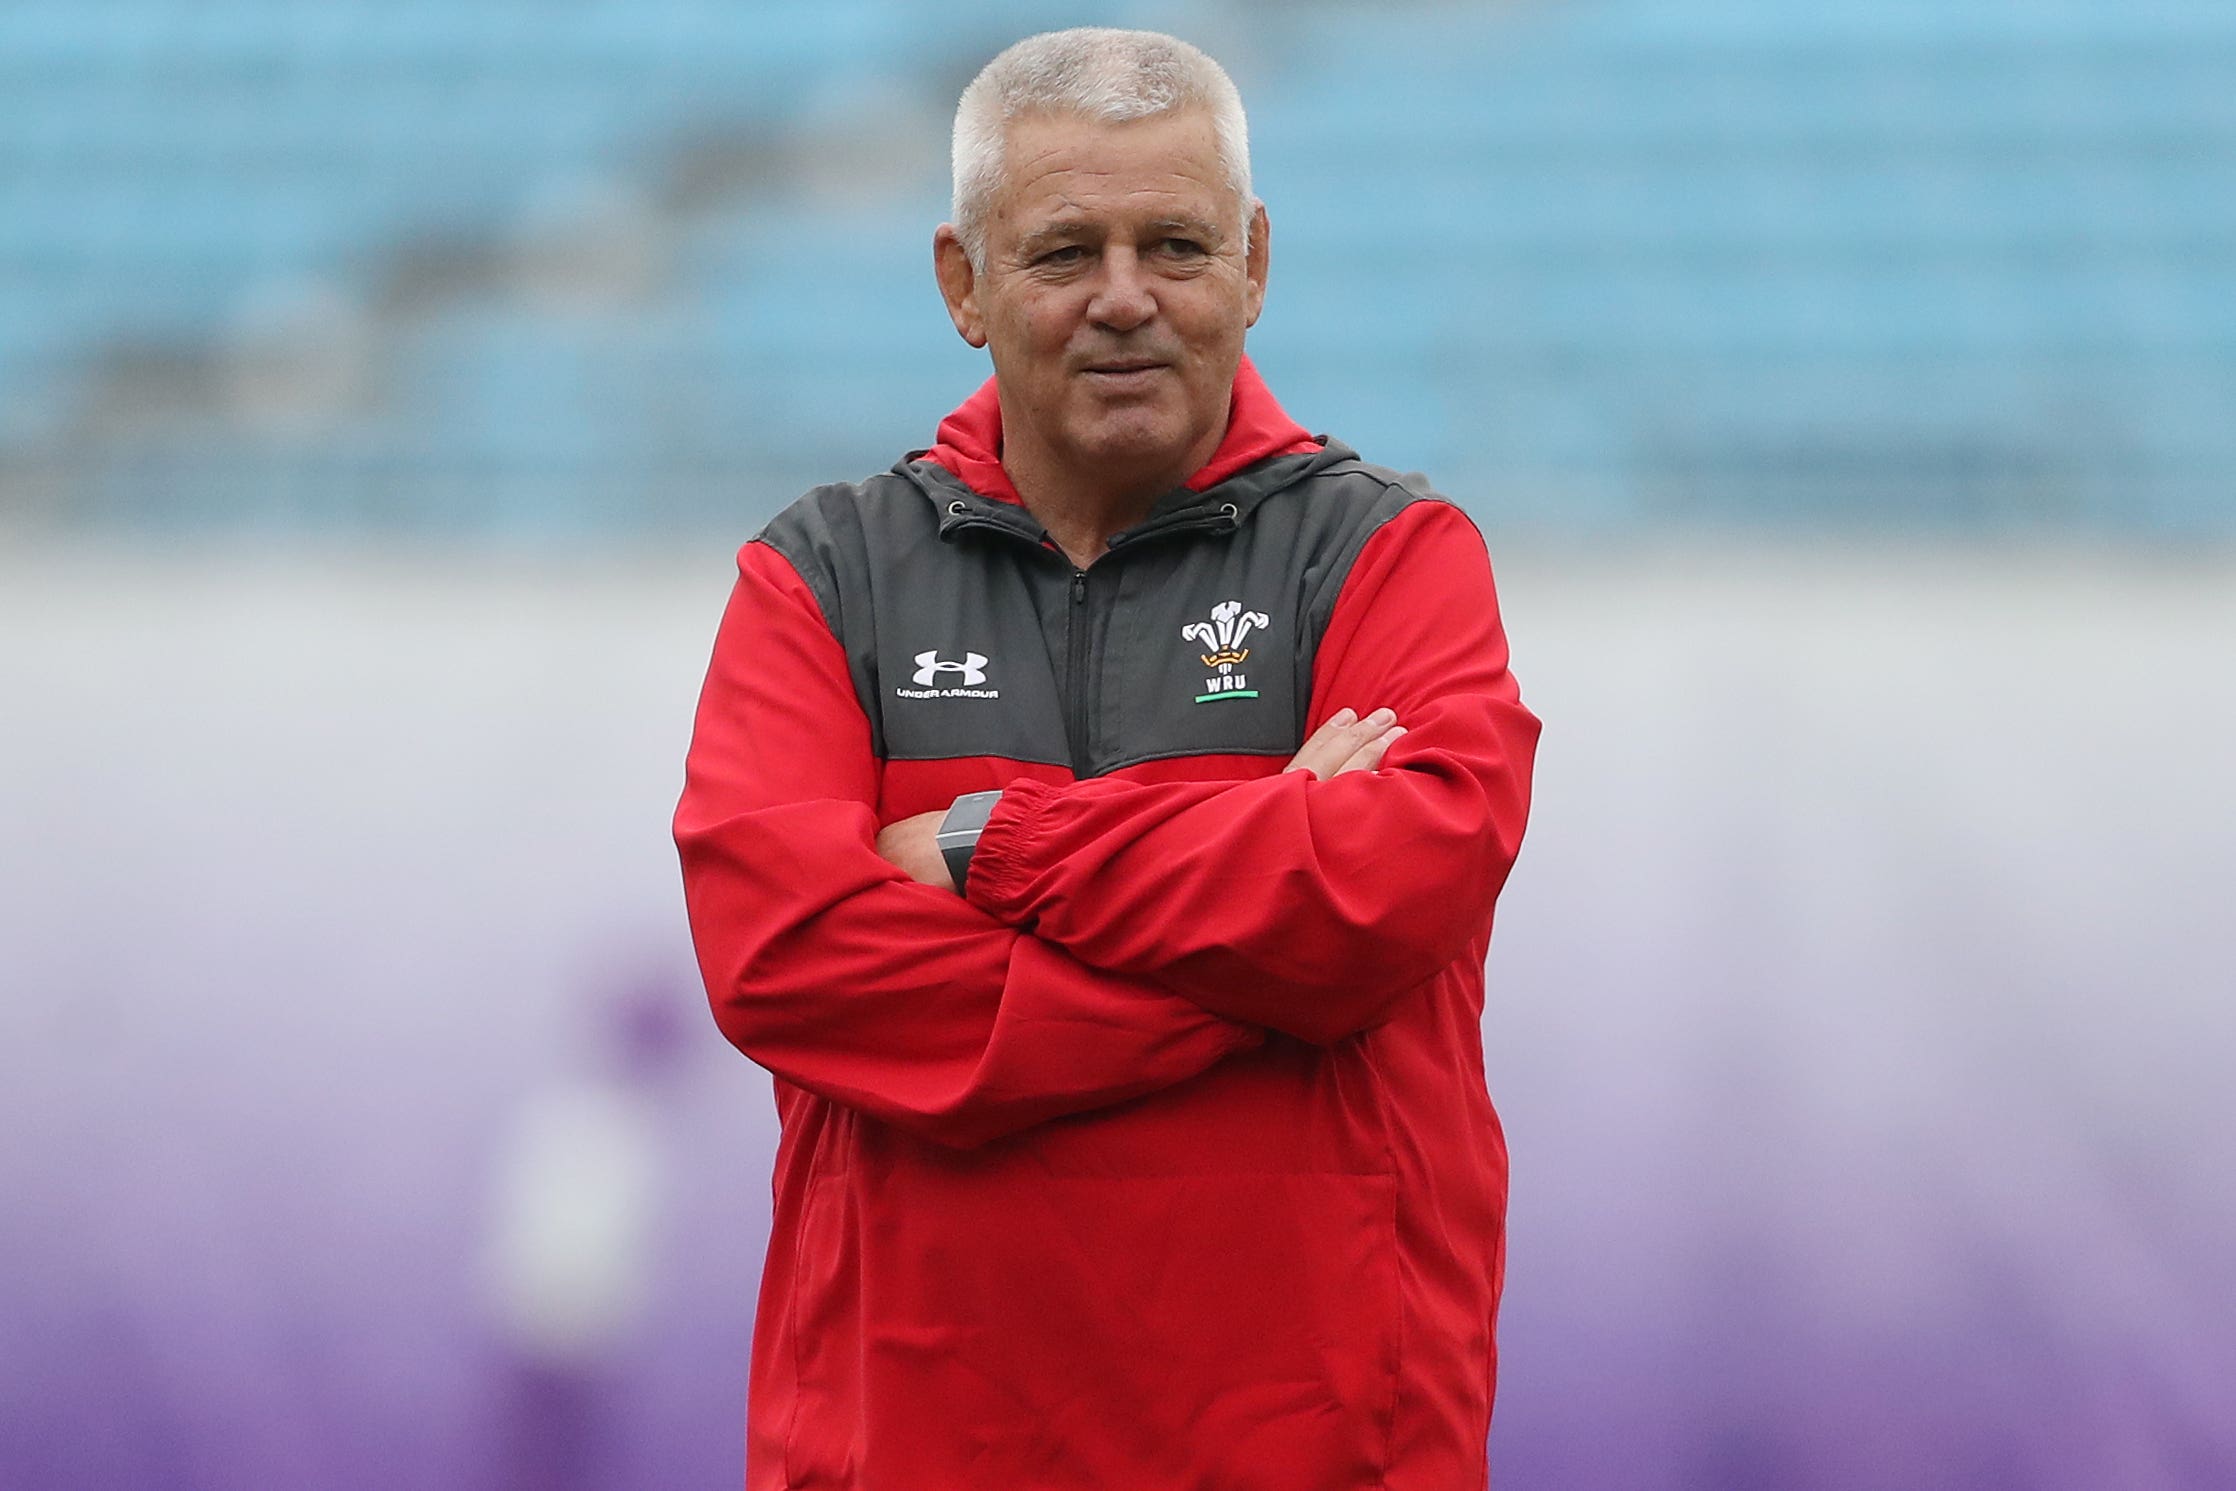 Warren Gatland is returning to his old role as Wales coach